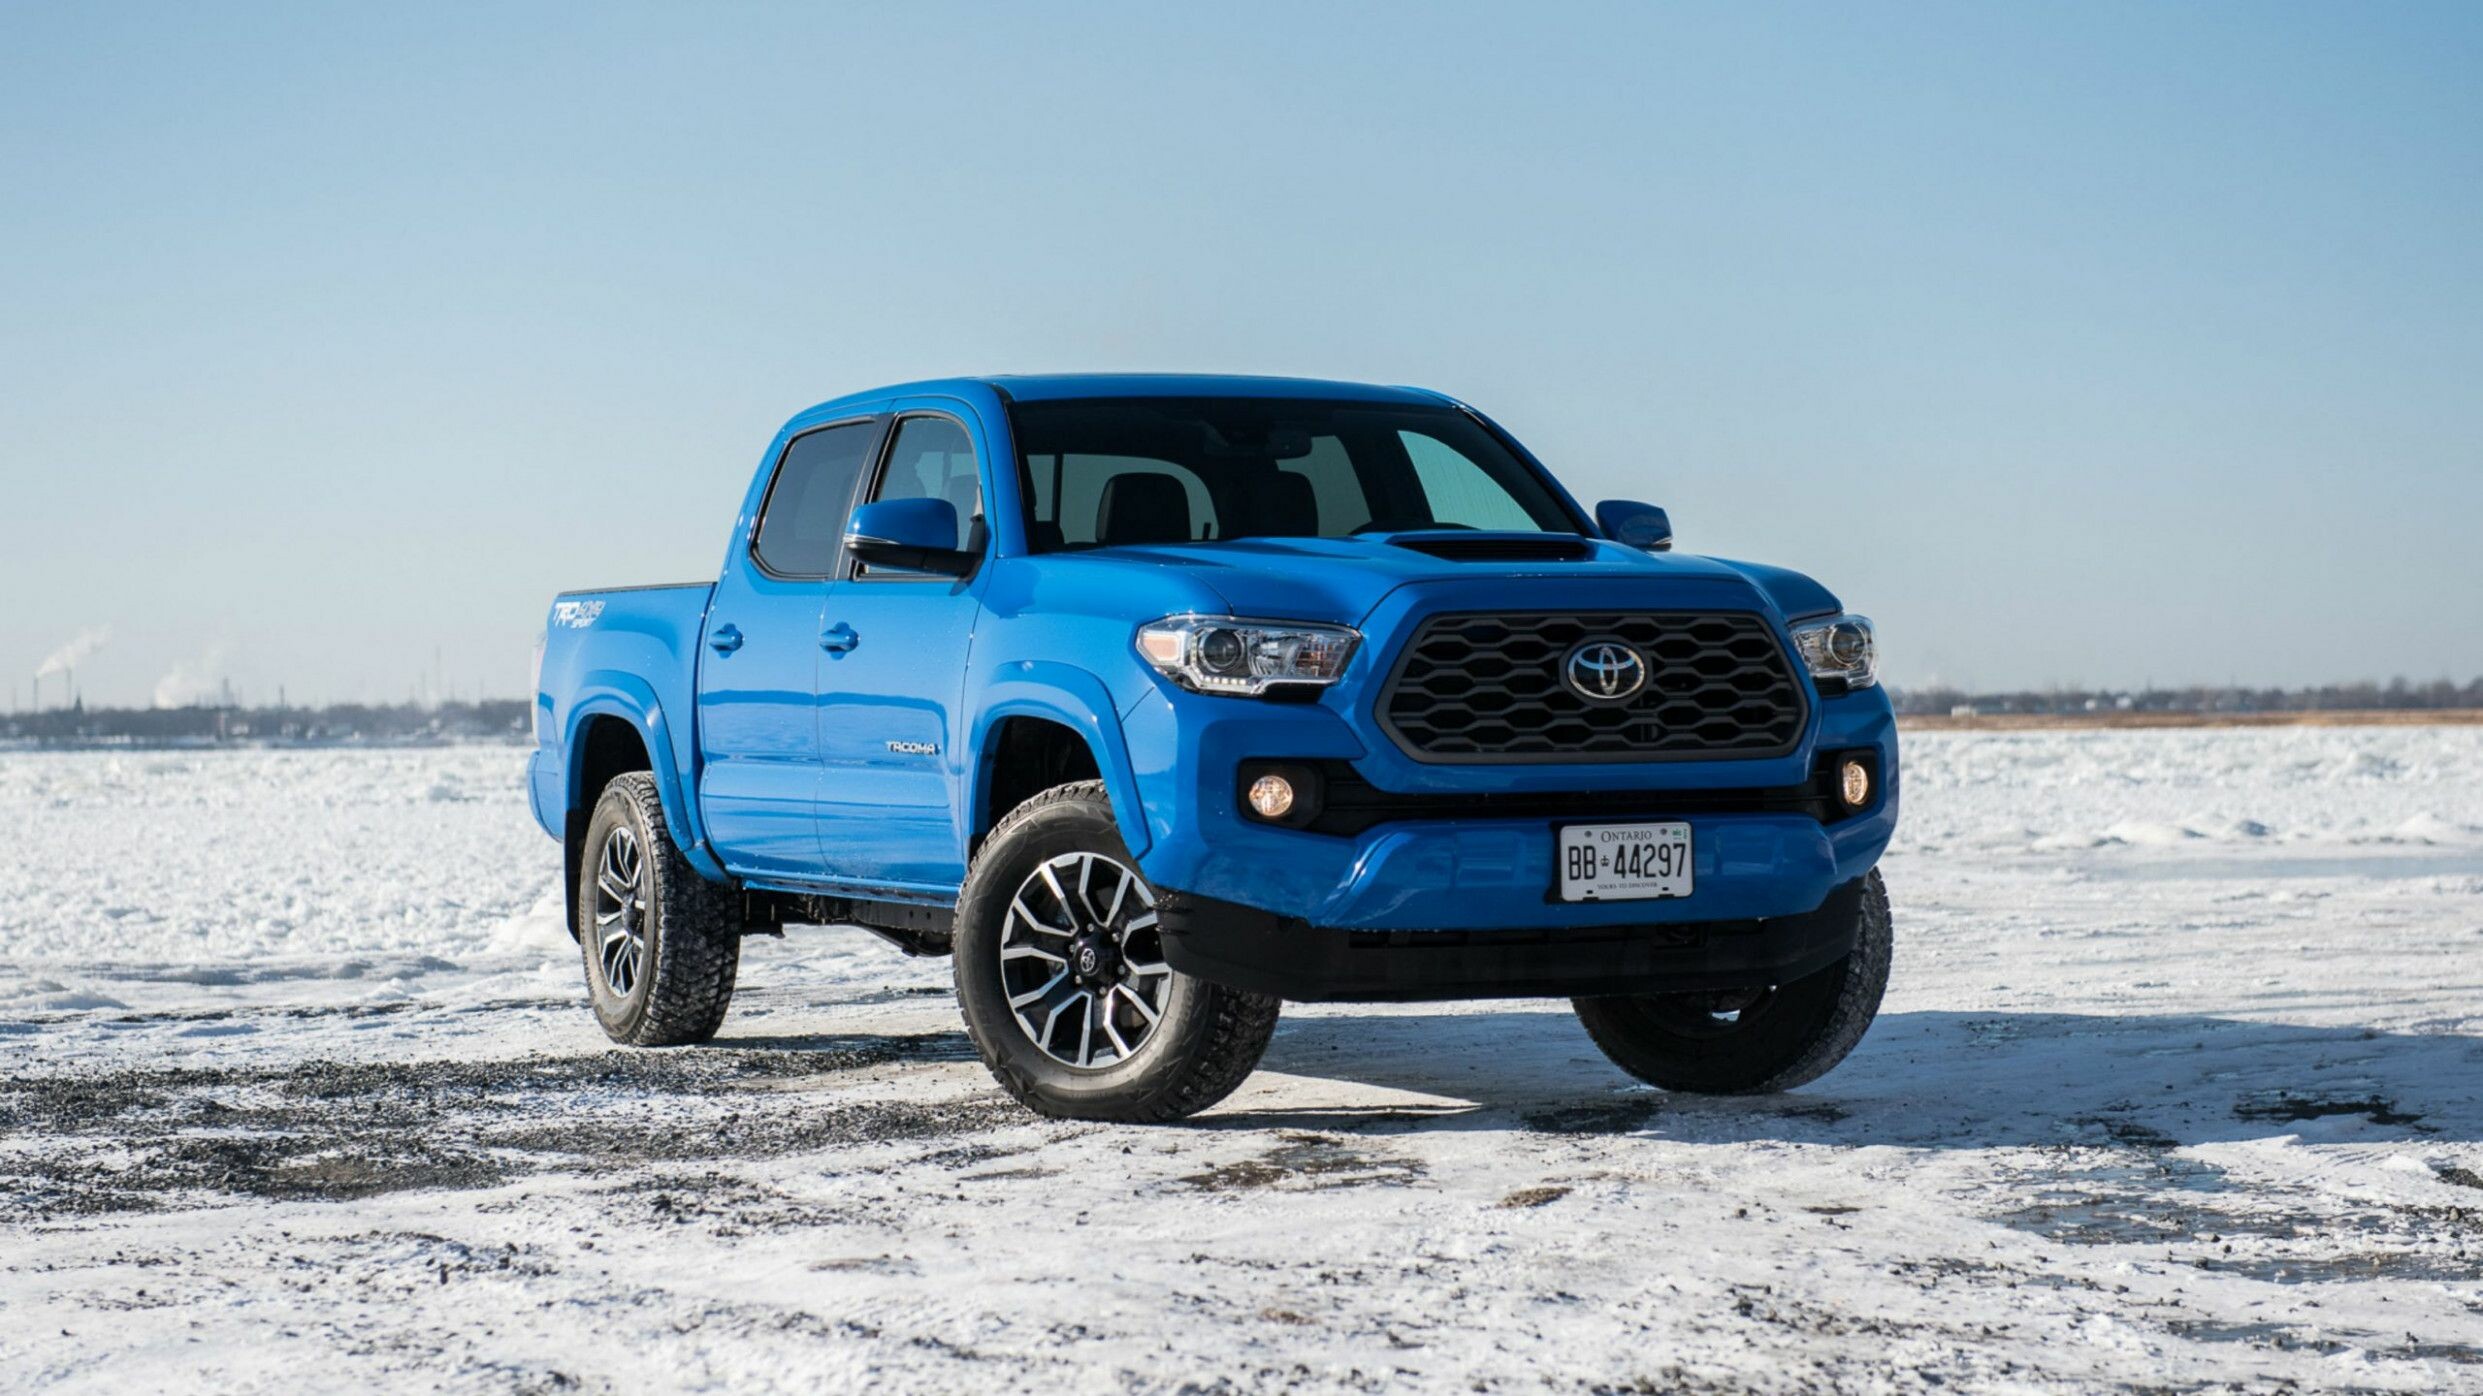 Toyota Tacoma: The model is offered in two TRD packages: Sport and Off-Road. 2490x1400 HD Wallpaper.